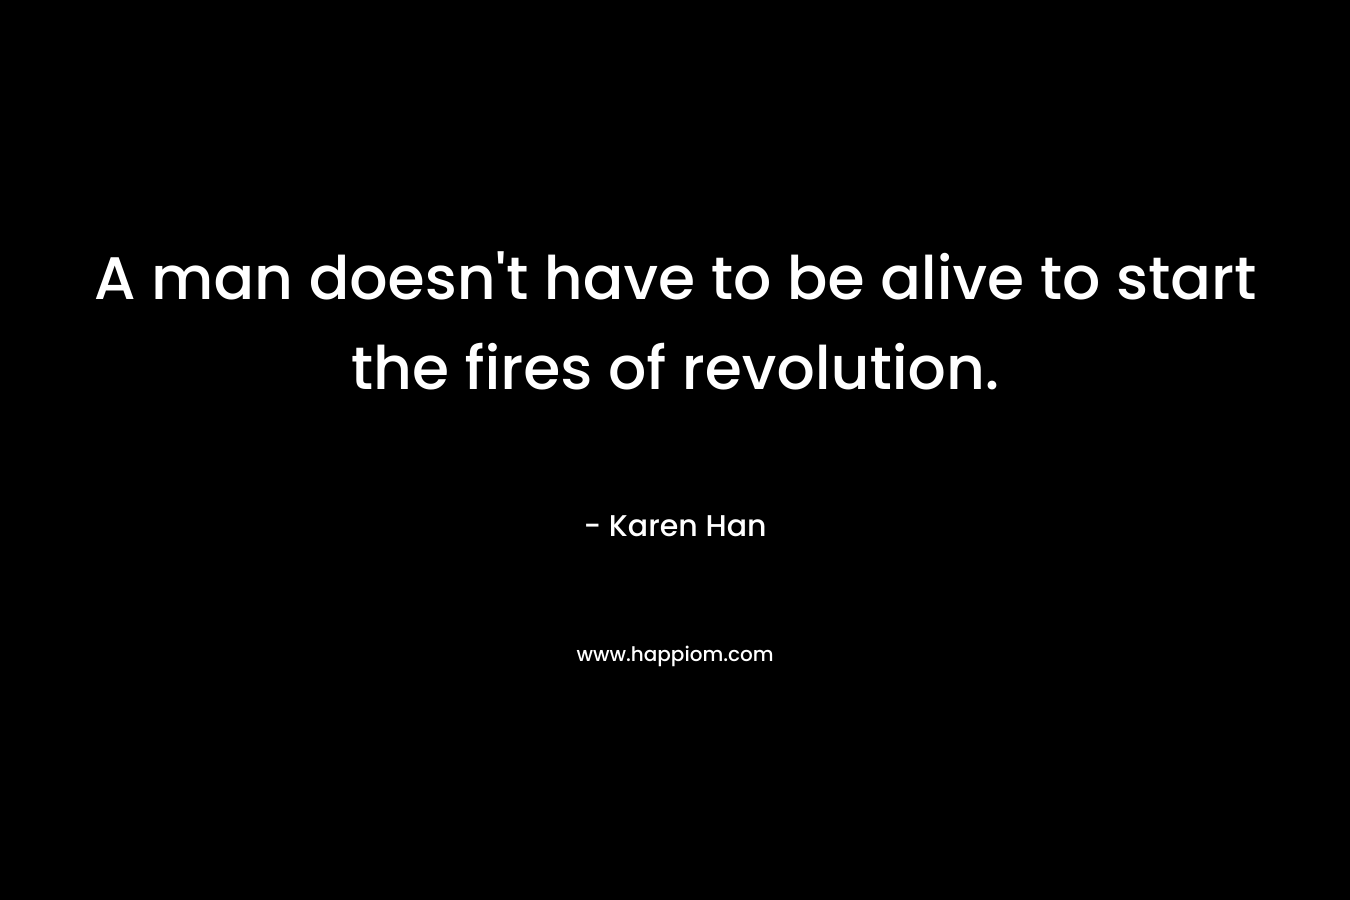 A man doesn't have to be alive to start the fires of revolution.